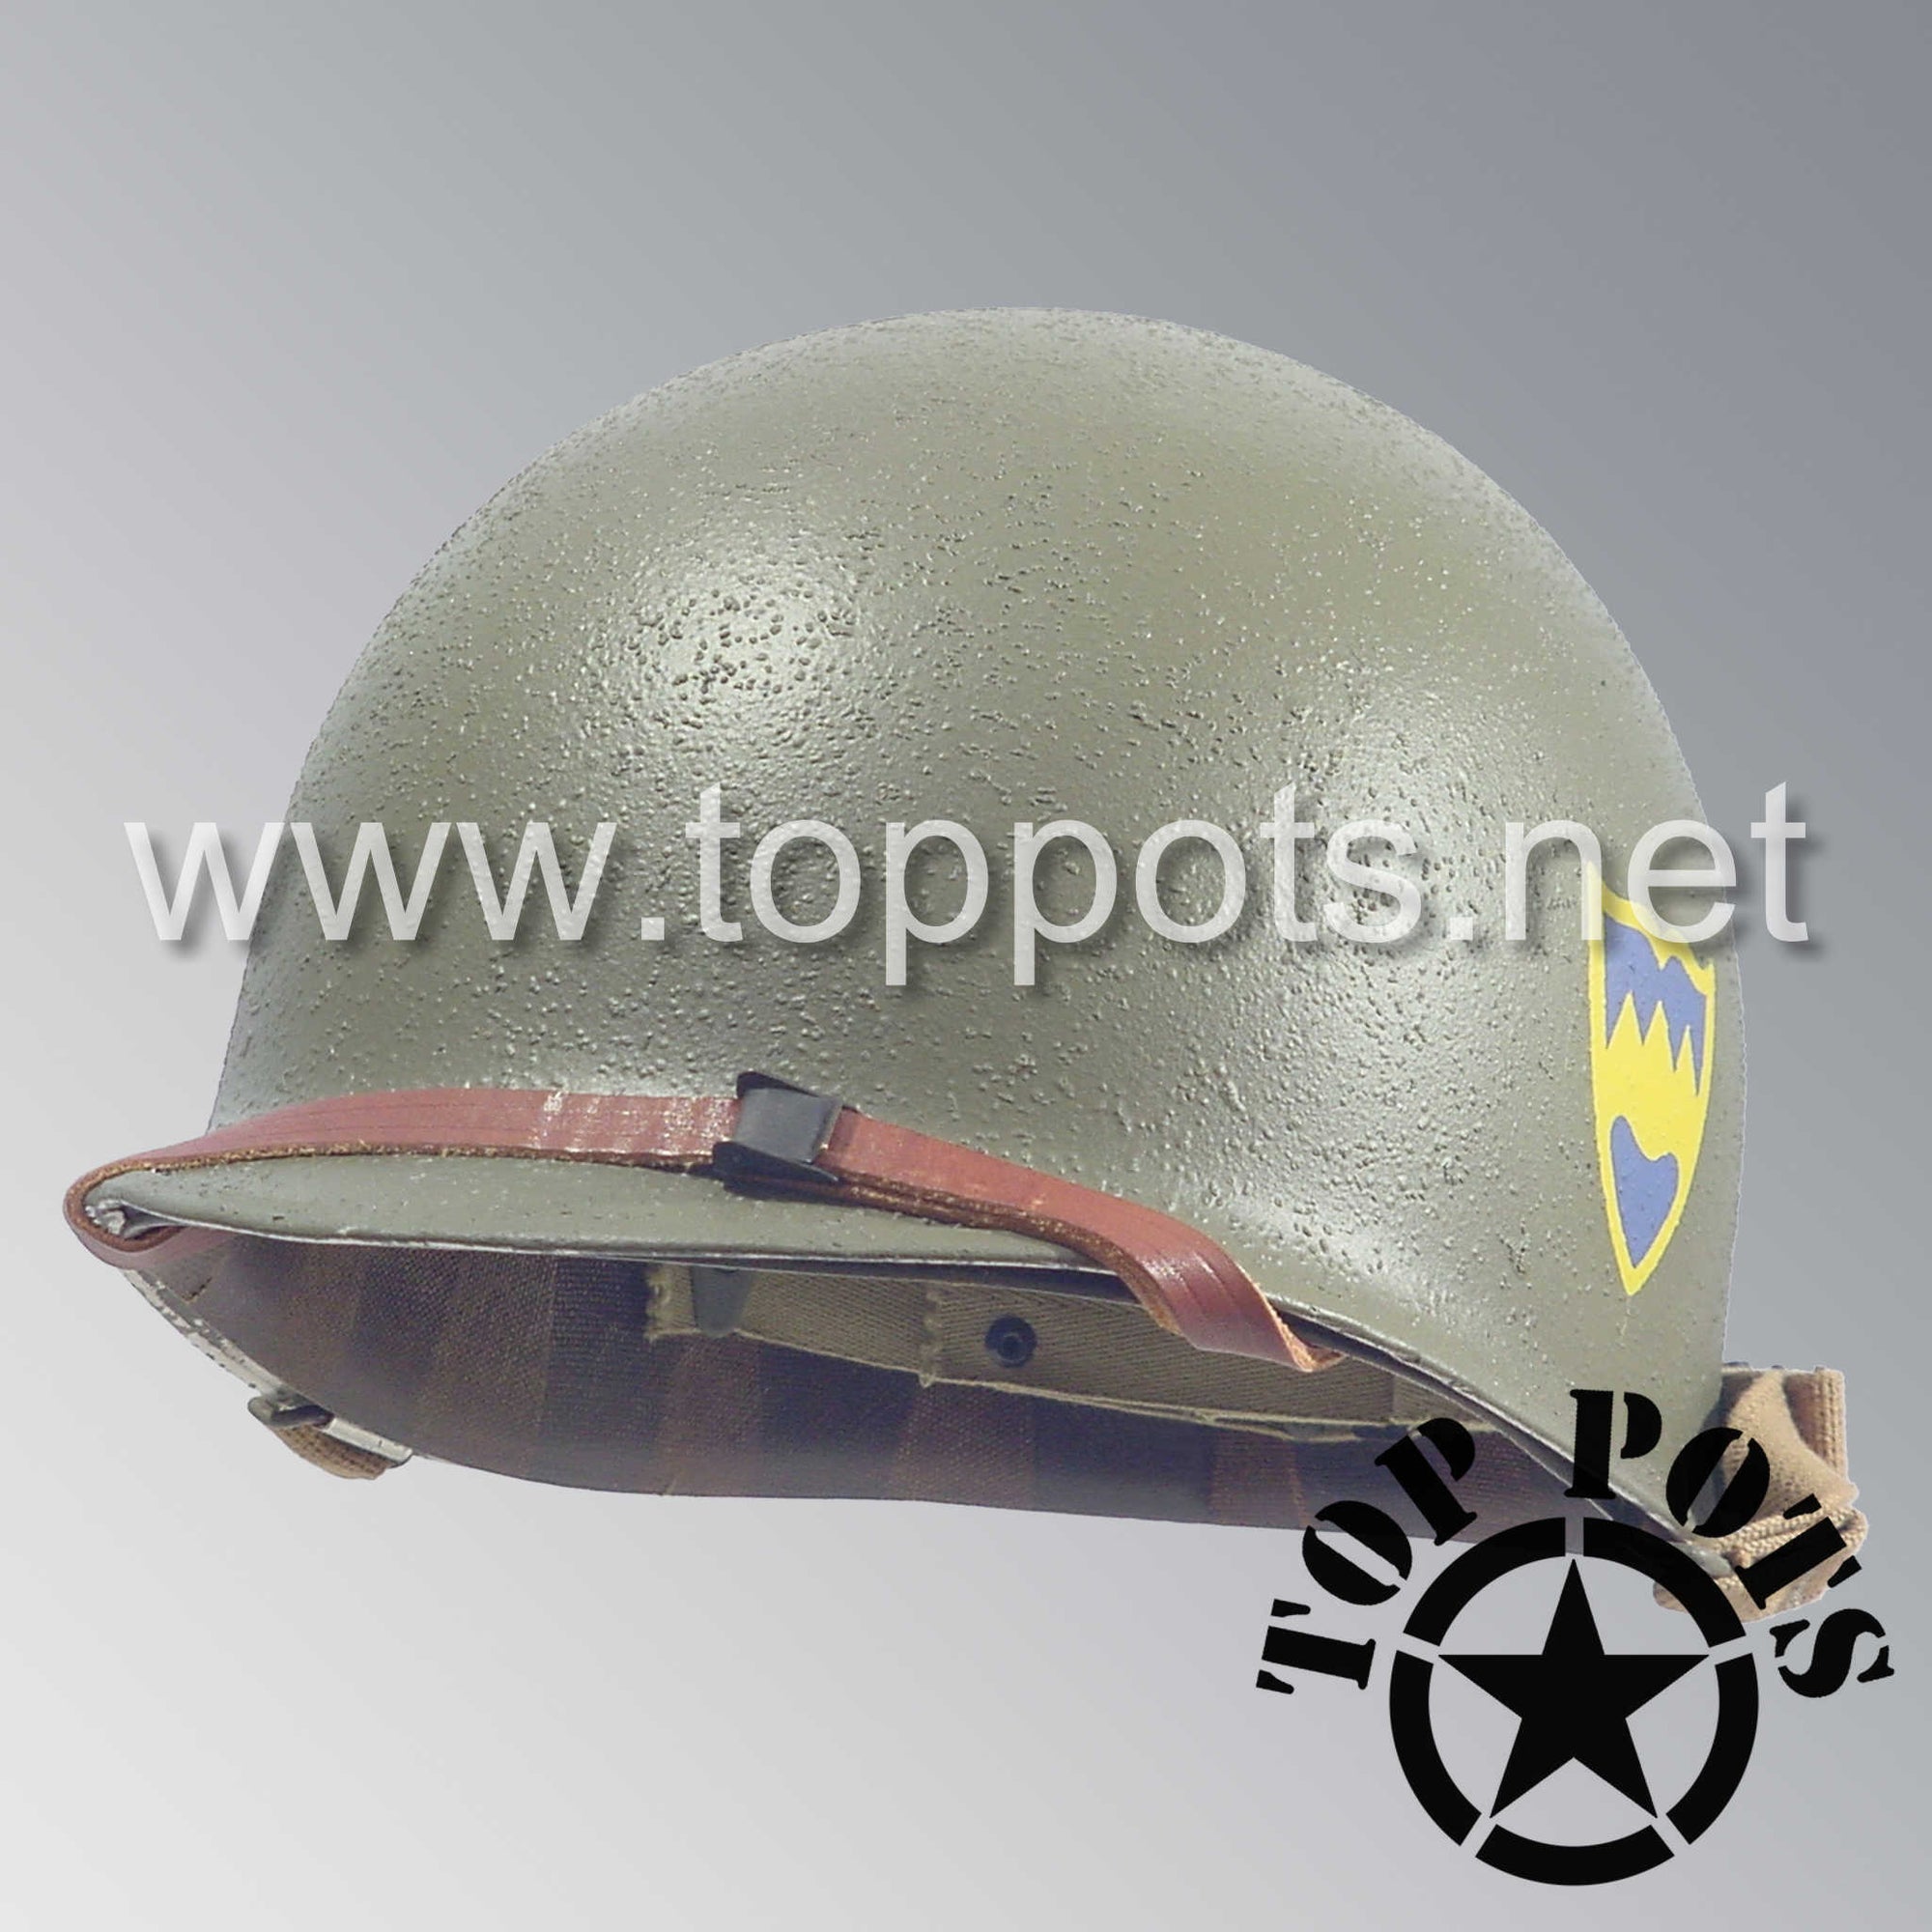 WWII US Army Restored Original M1 Infantry Helmet Swivel Bale Shell and Liner with 104th Infantry Division 415th Regiment Emblem